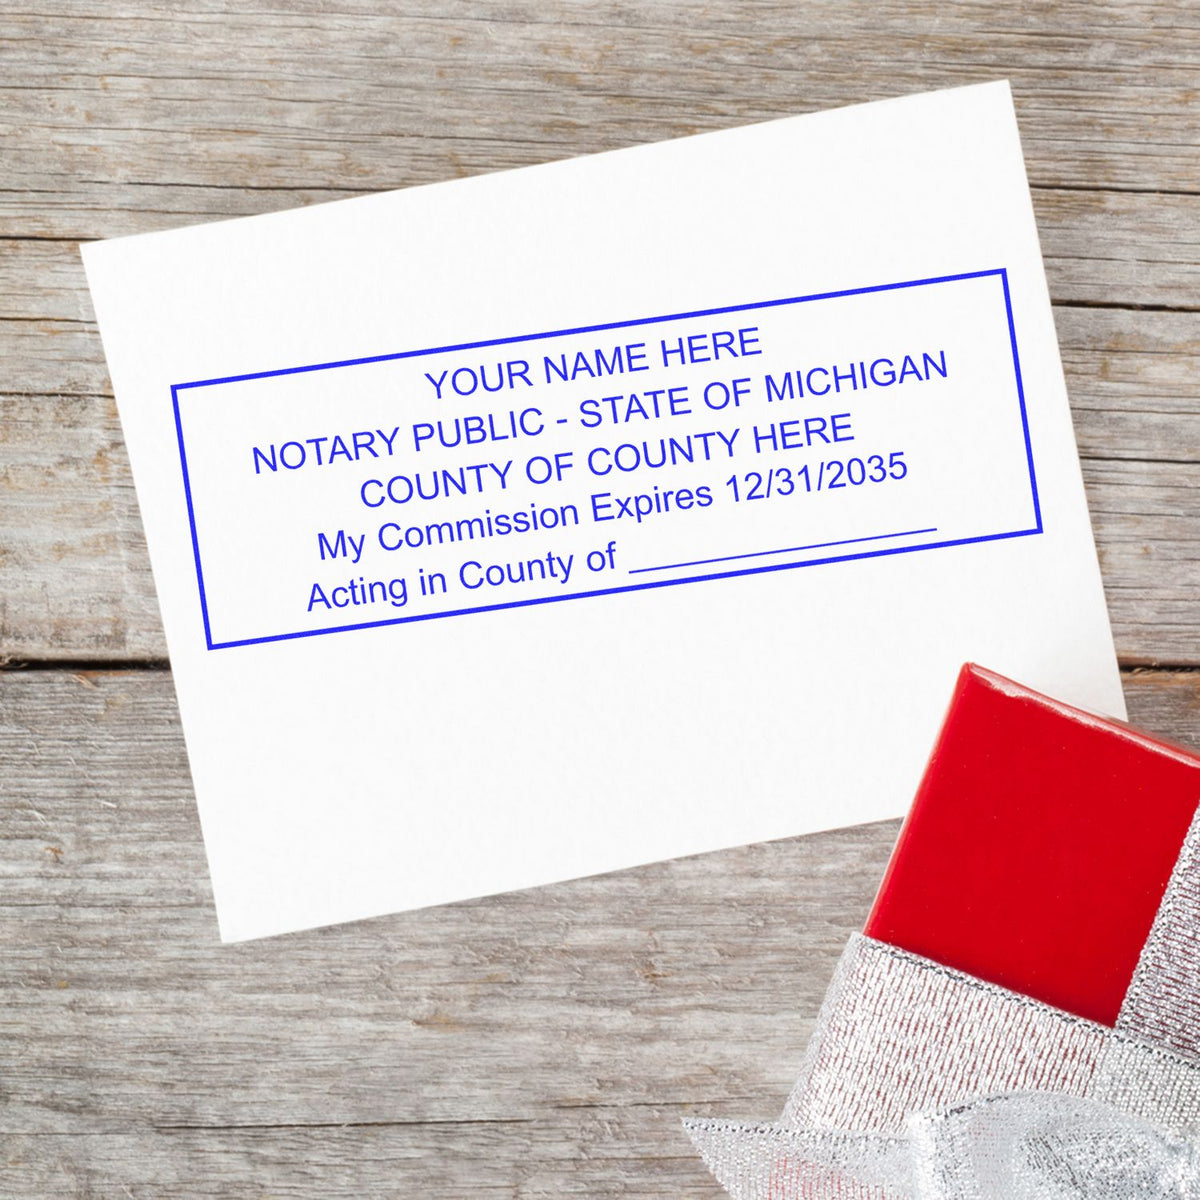 A photograph of the Heavy-Duty Michigan Rectangular Notary Stamp stamp impression reveals a vivid, professional image of the on paper.